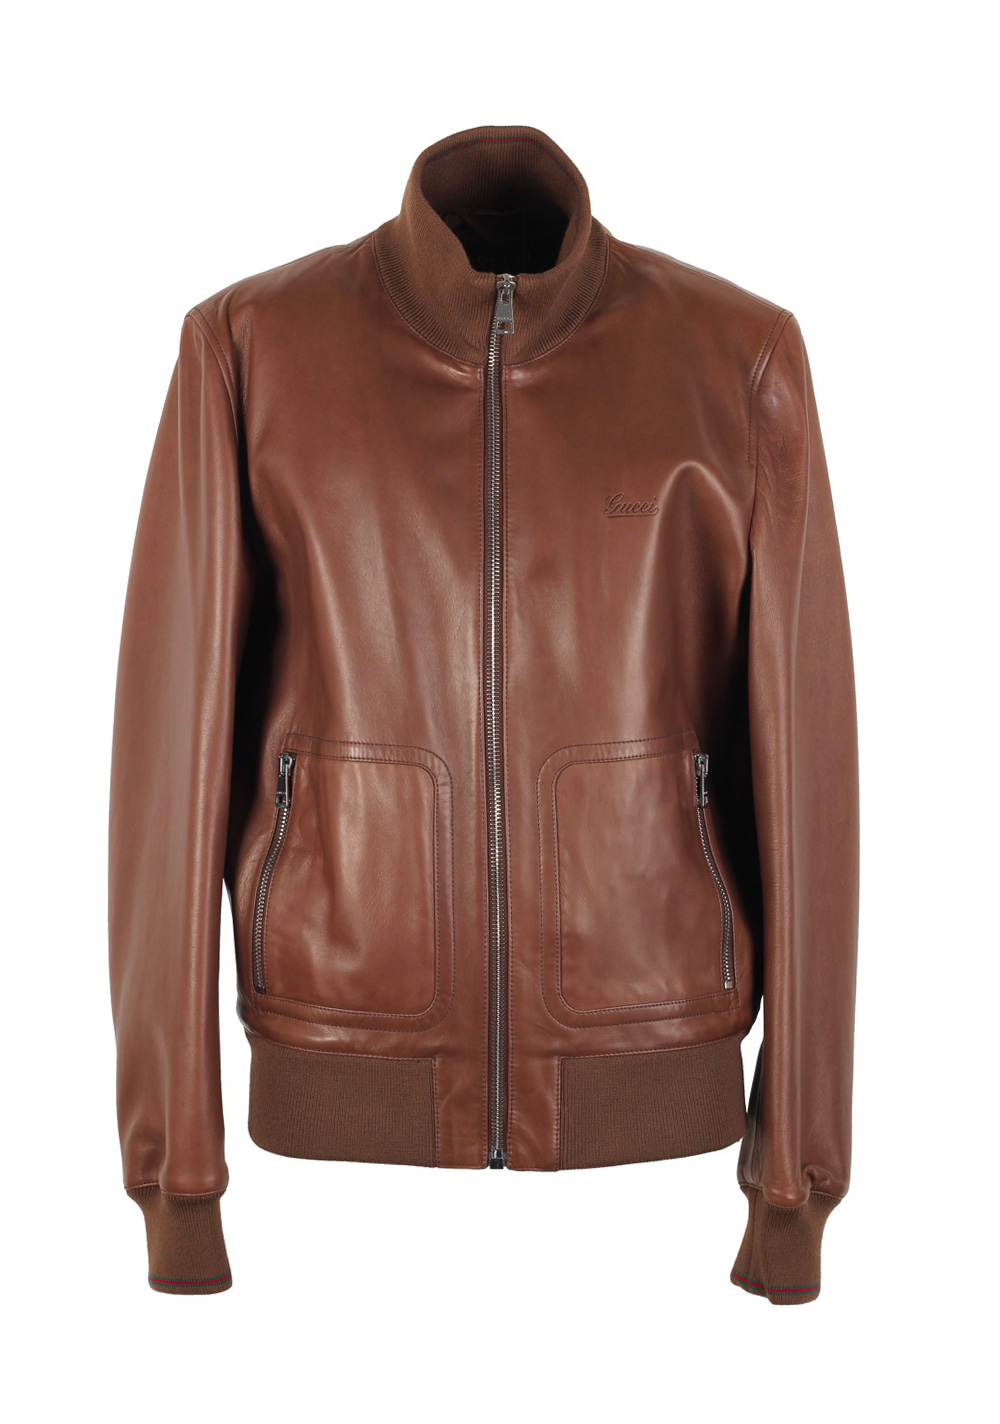 Gucci Brown Nappa Leather Bomber Jacket Coat Size 56 / 46R U.S. | Costume Limité